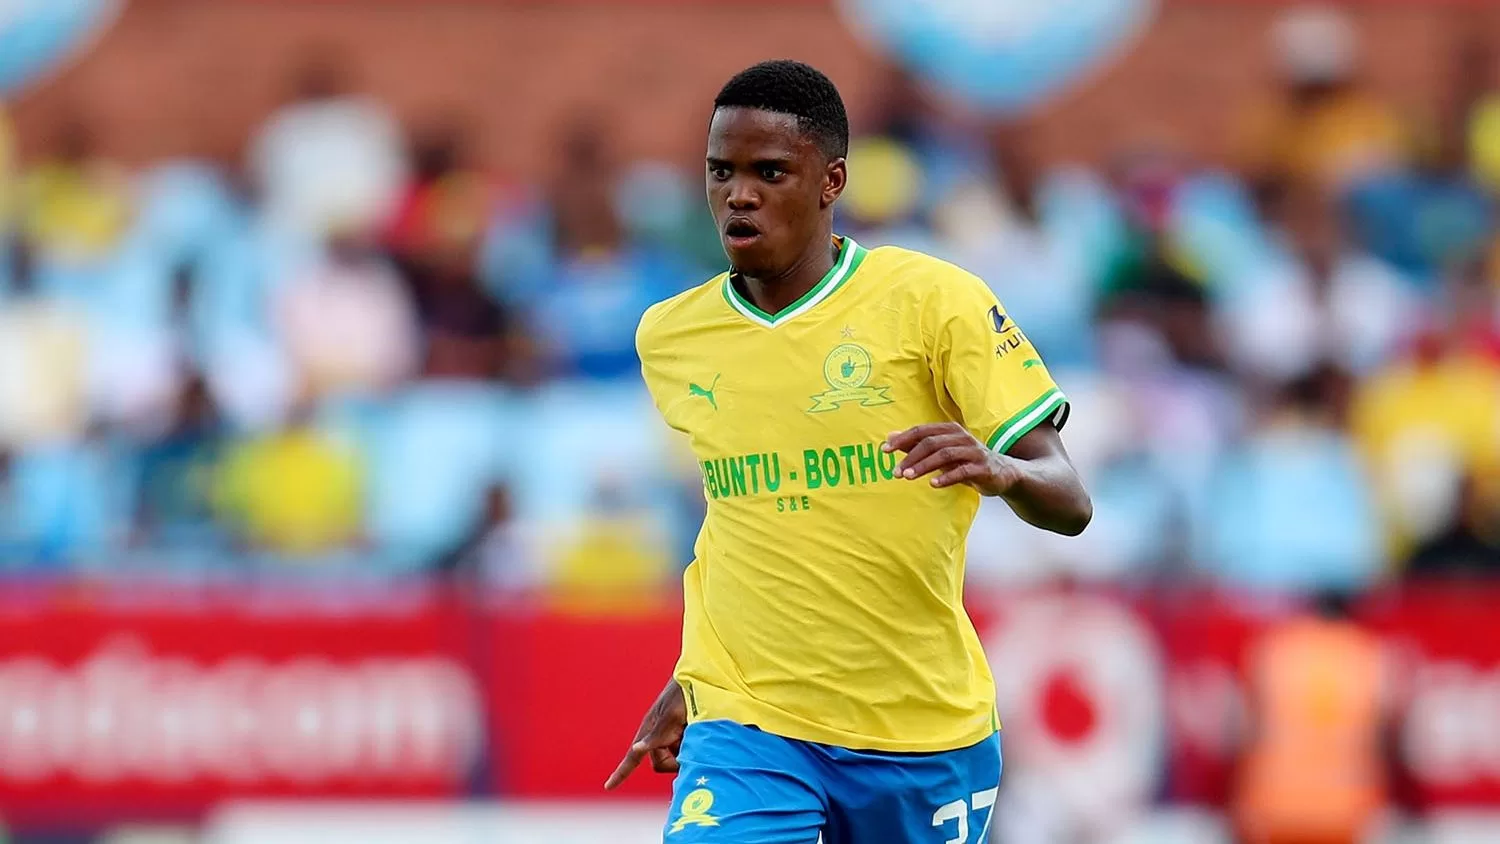   AmaZulu FC confirm the signing of a Mamelodi Sundowns defender  